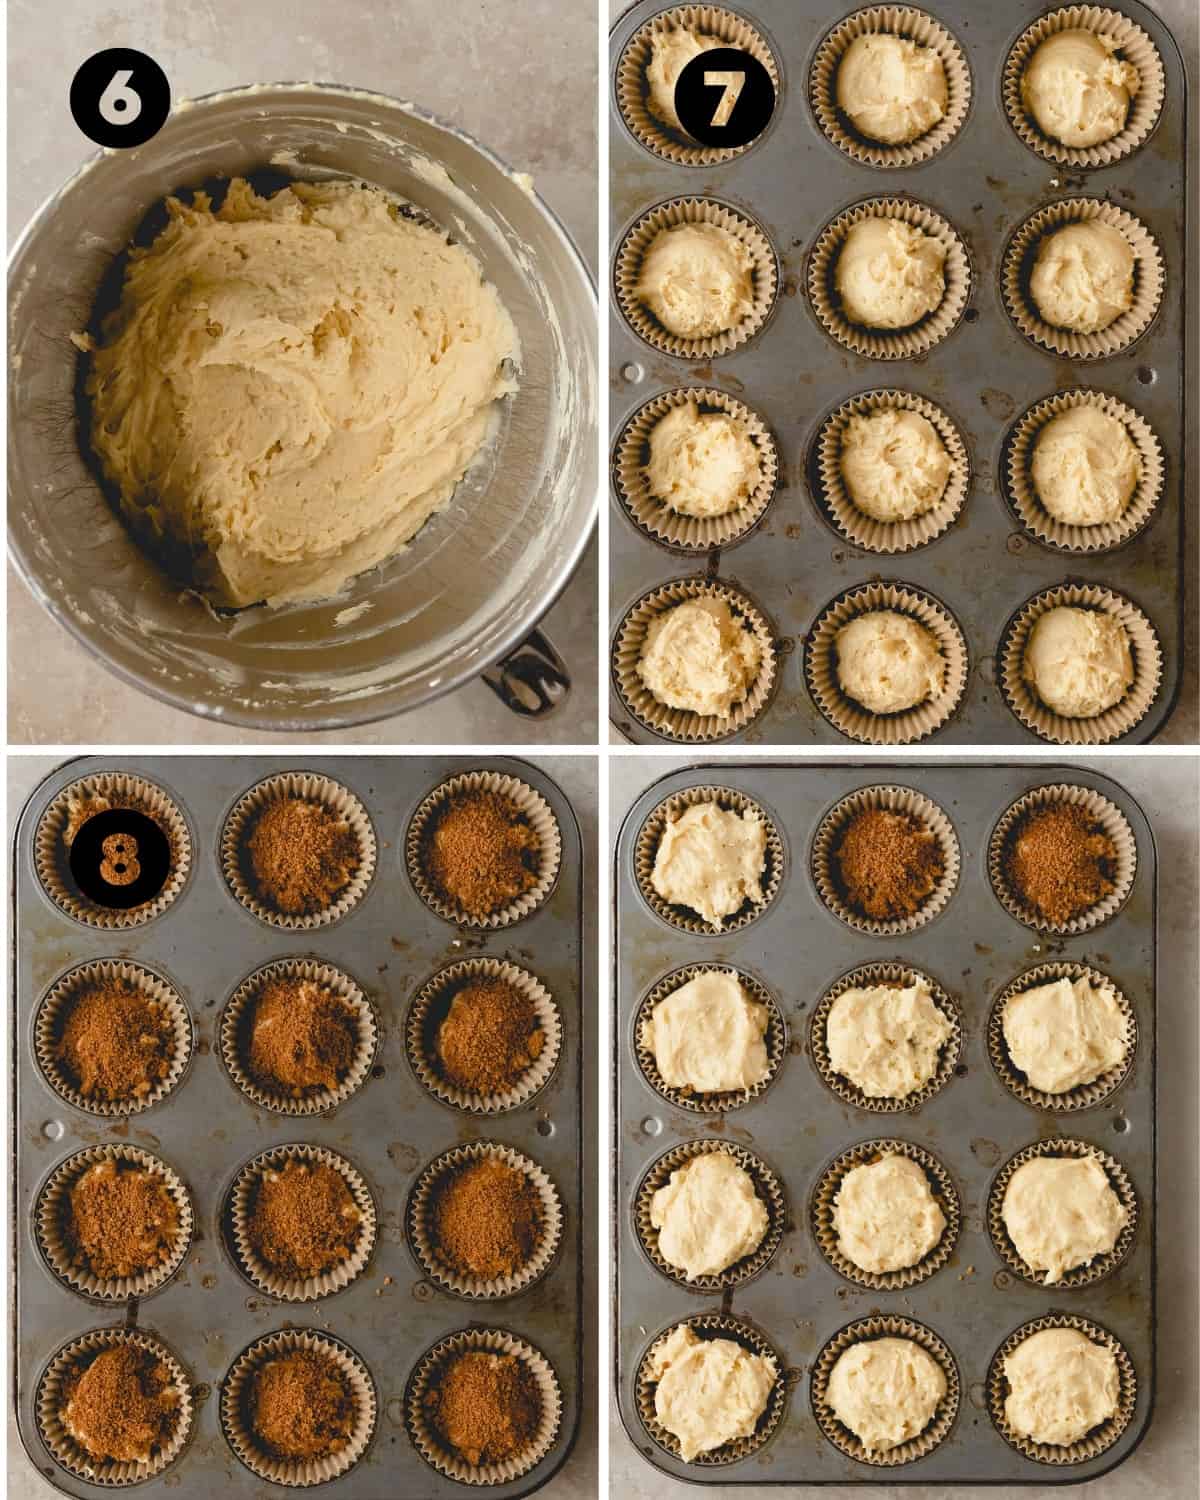 Cinnamon crumle muffins being assembled. Scoop the muffin batter into the lined muffin pan, top with cinnamon filling, top with more muffin .